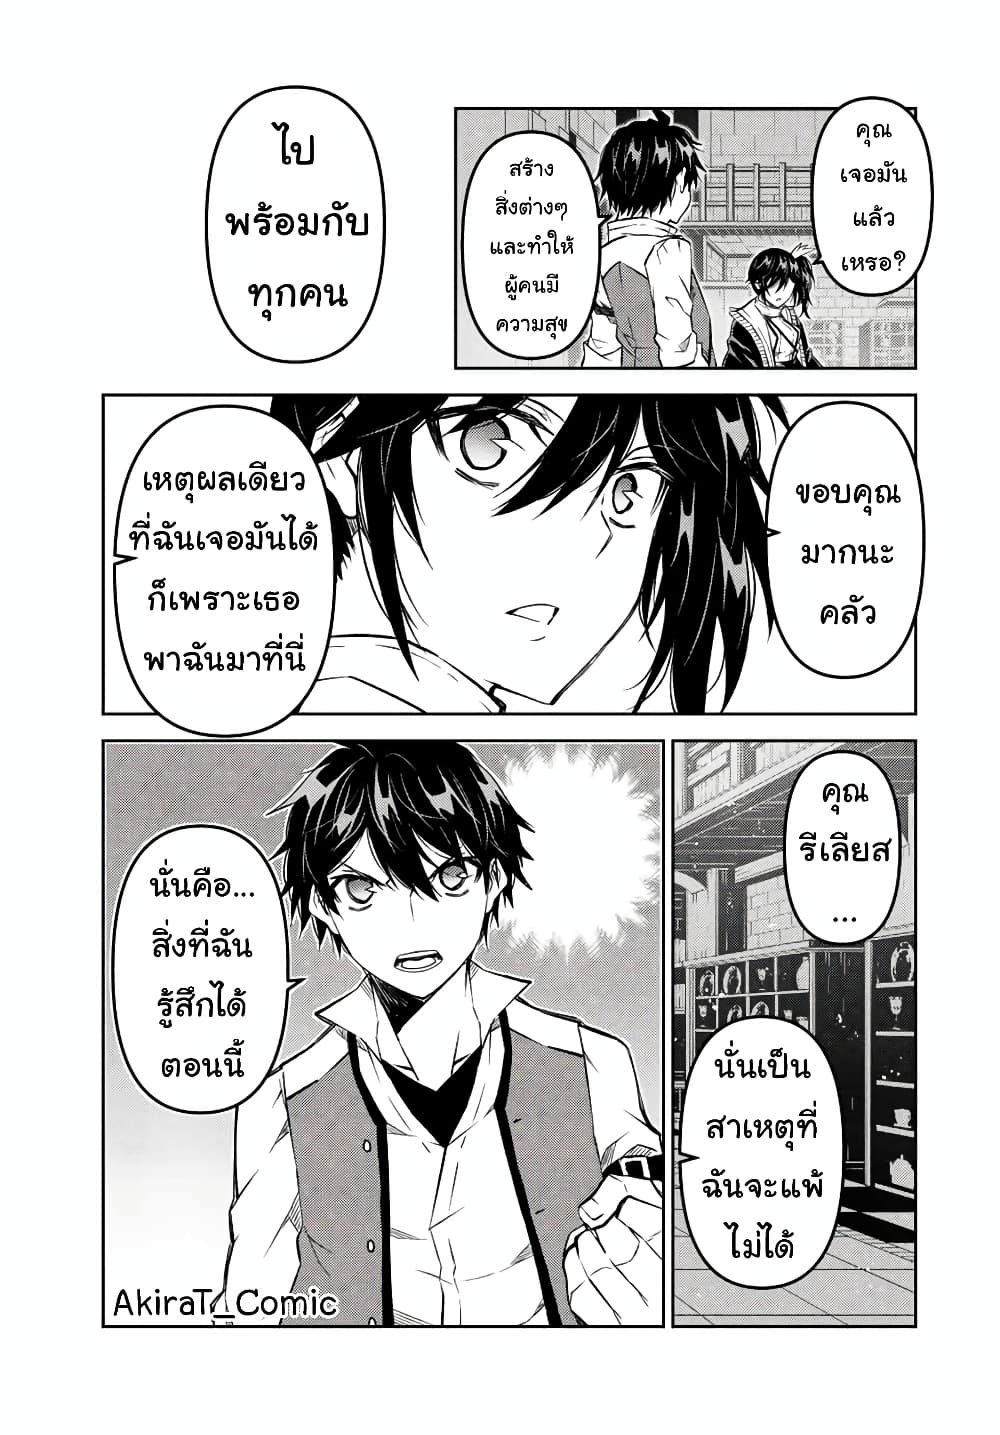 The Weakest Occupation "Blacksmith", but It's Actually the Strongest ช่างตีเหล็กอาชีพกระจอก? 106-106